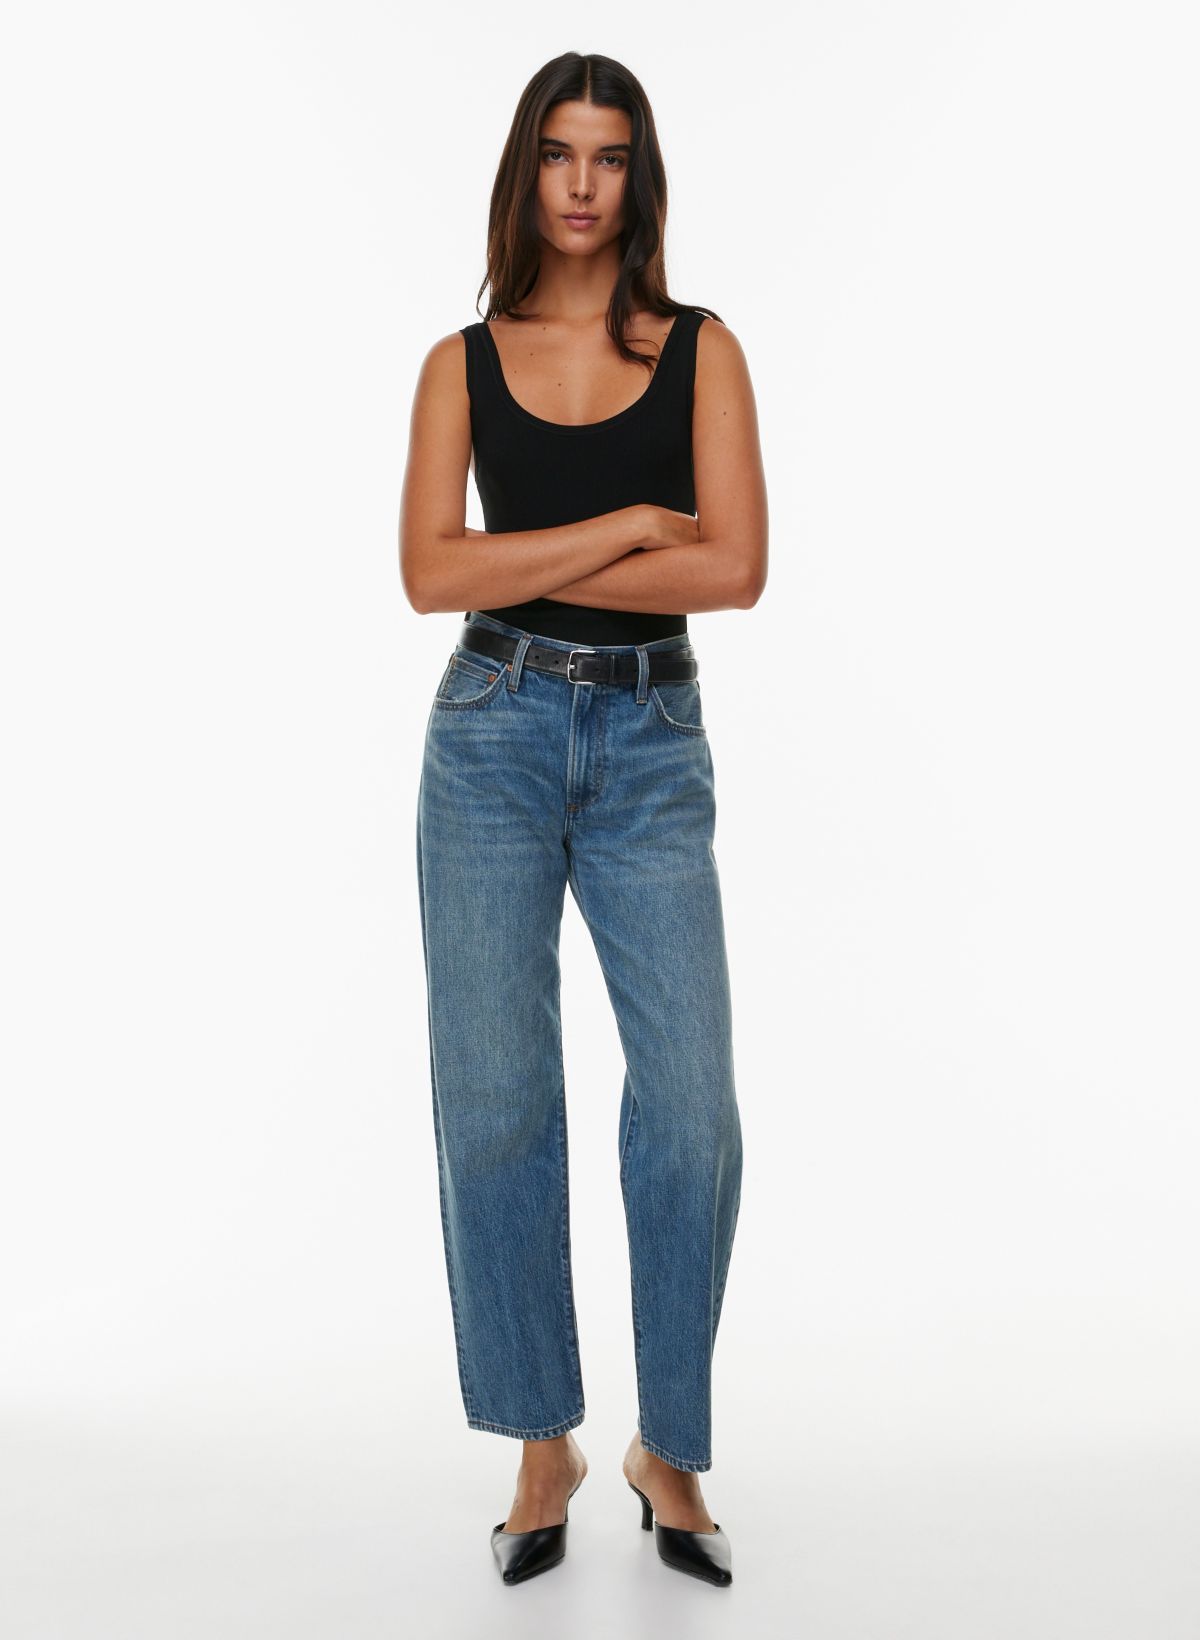 Aritzia has been COMING THROUGH for me this pregnancy - Canadian Parents, Forums